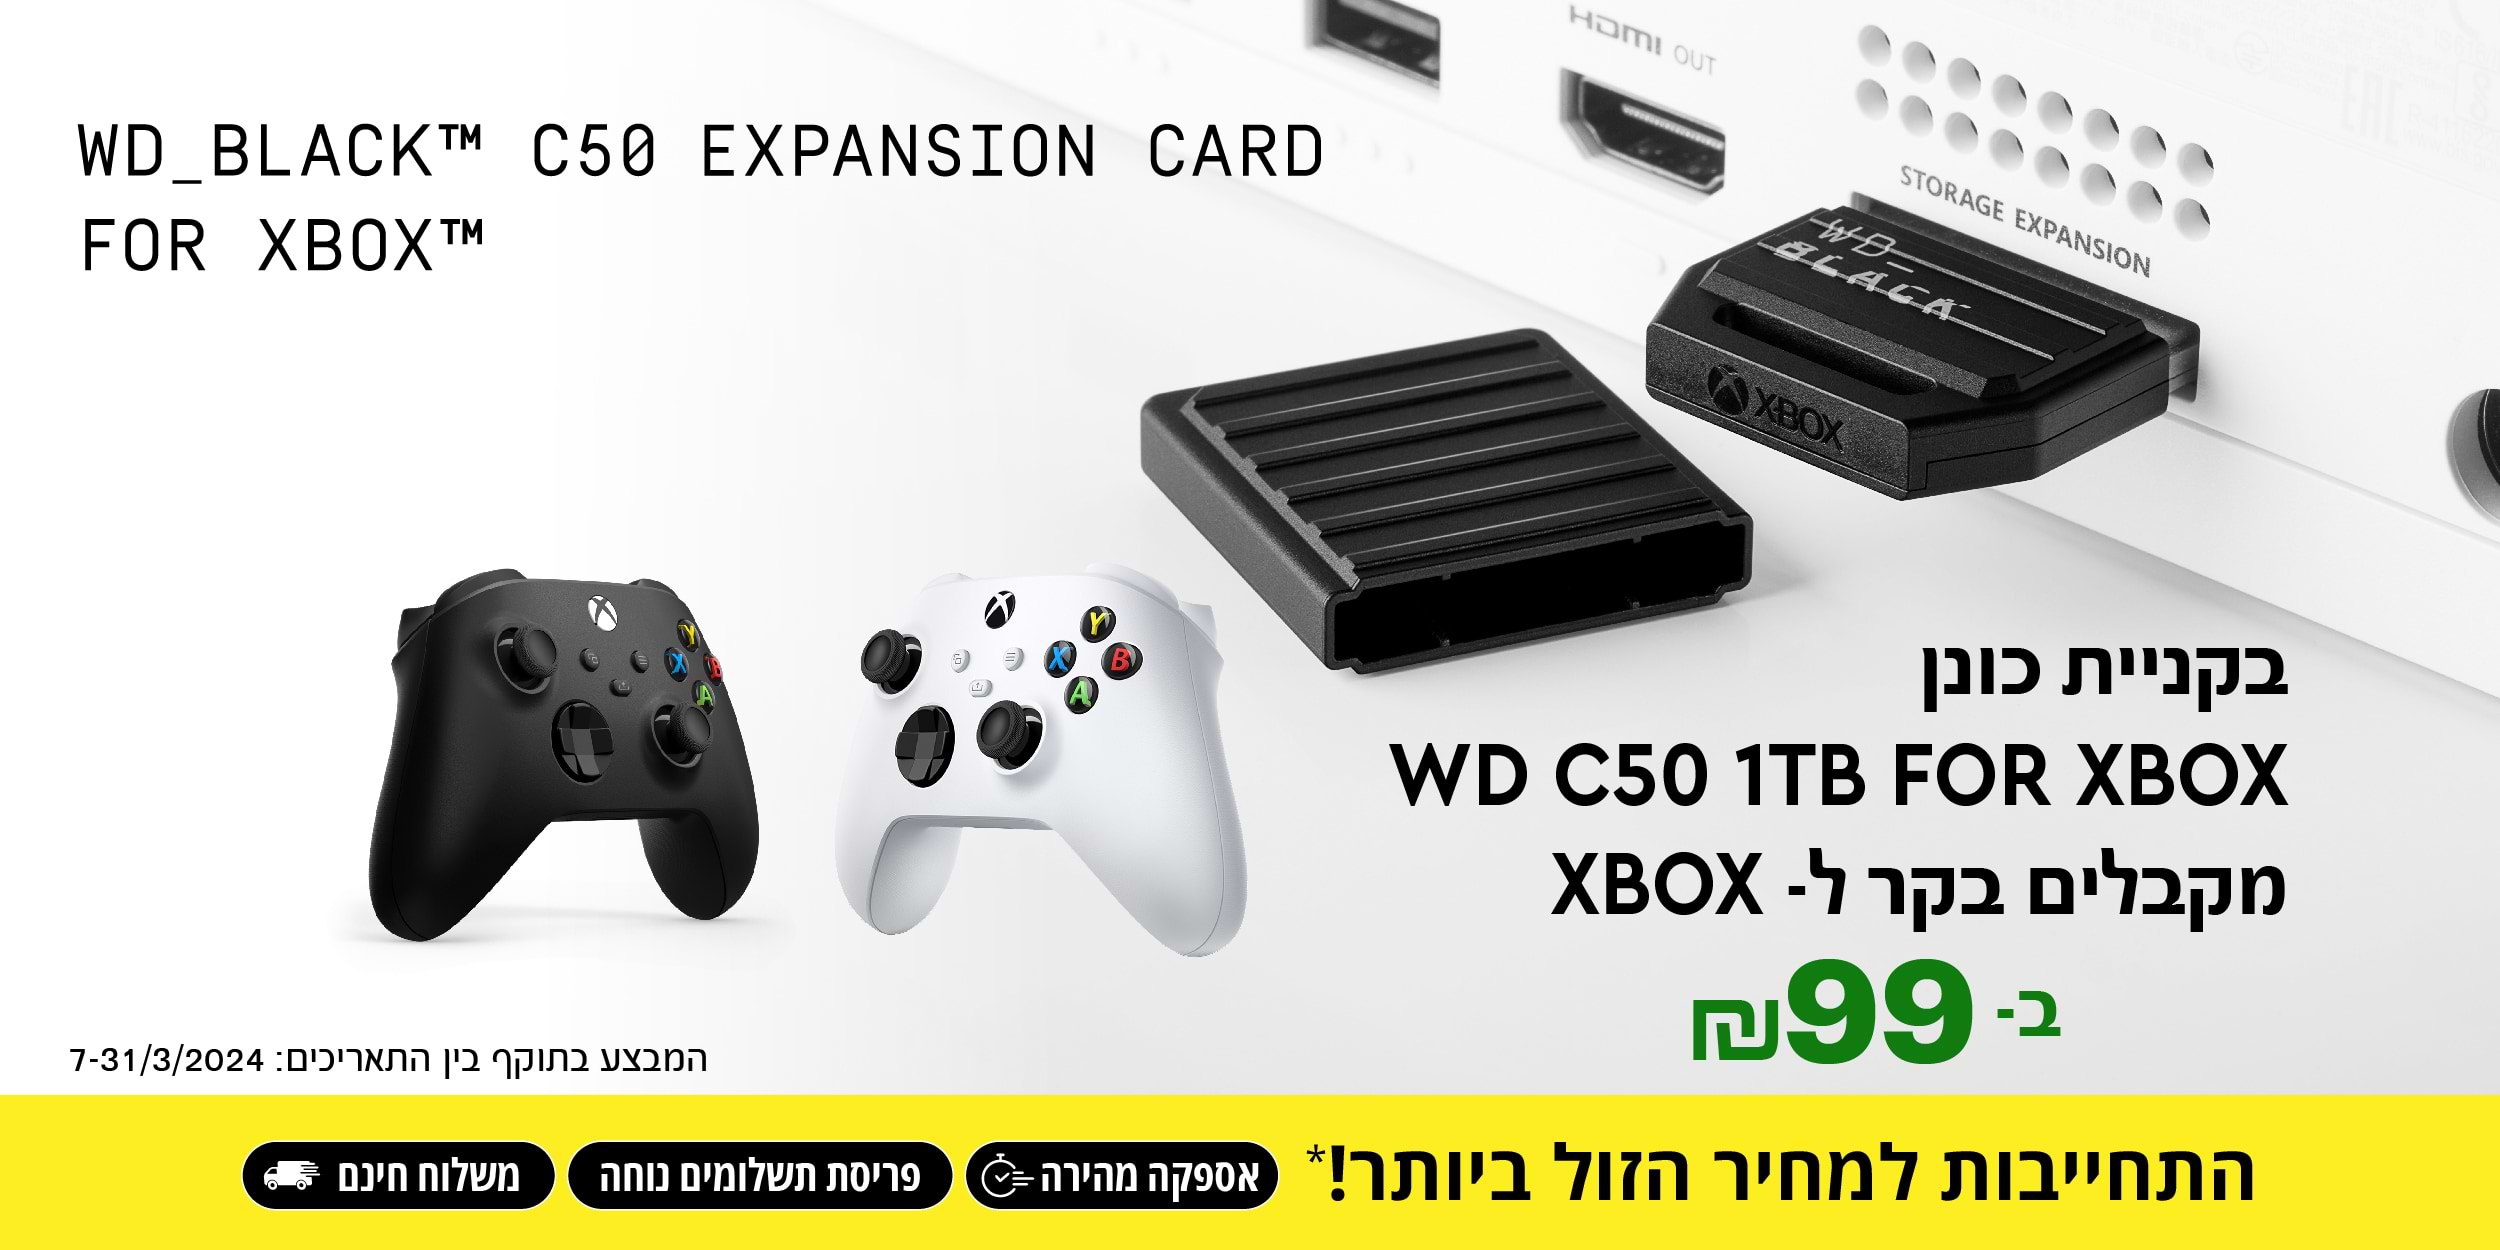 WD_BLACK C50 EXPANSION CARD FOR XBOX בקניית כונן WD C50 1TB FOR XBOX מקבלים בקר ל-XBOX ב- 99 ש